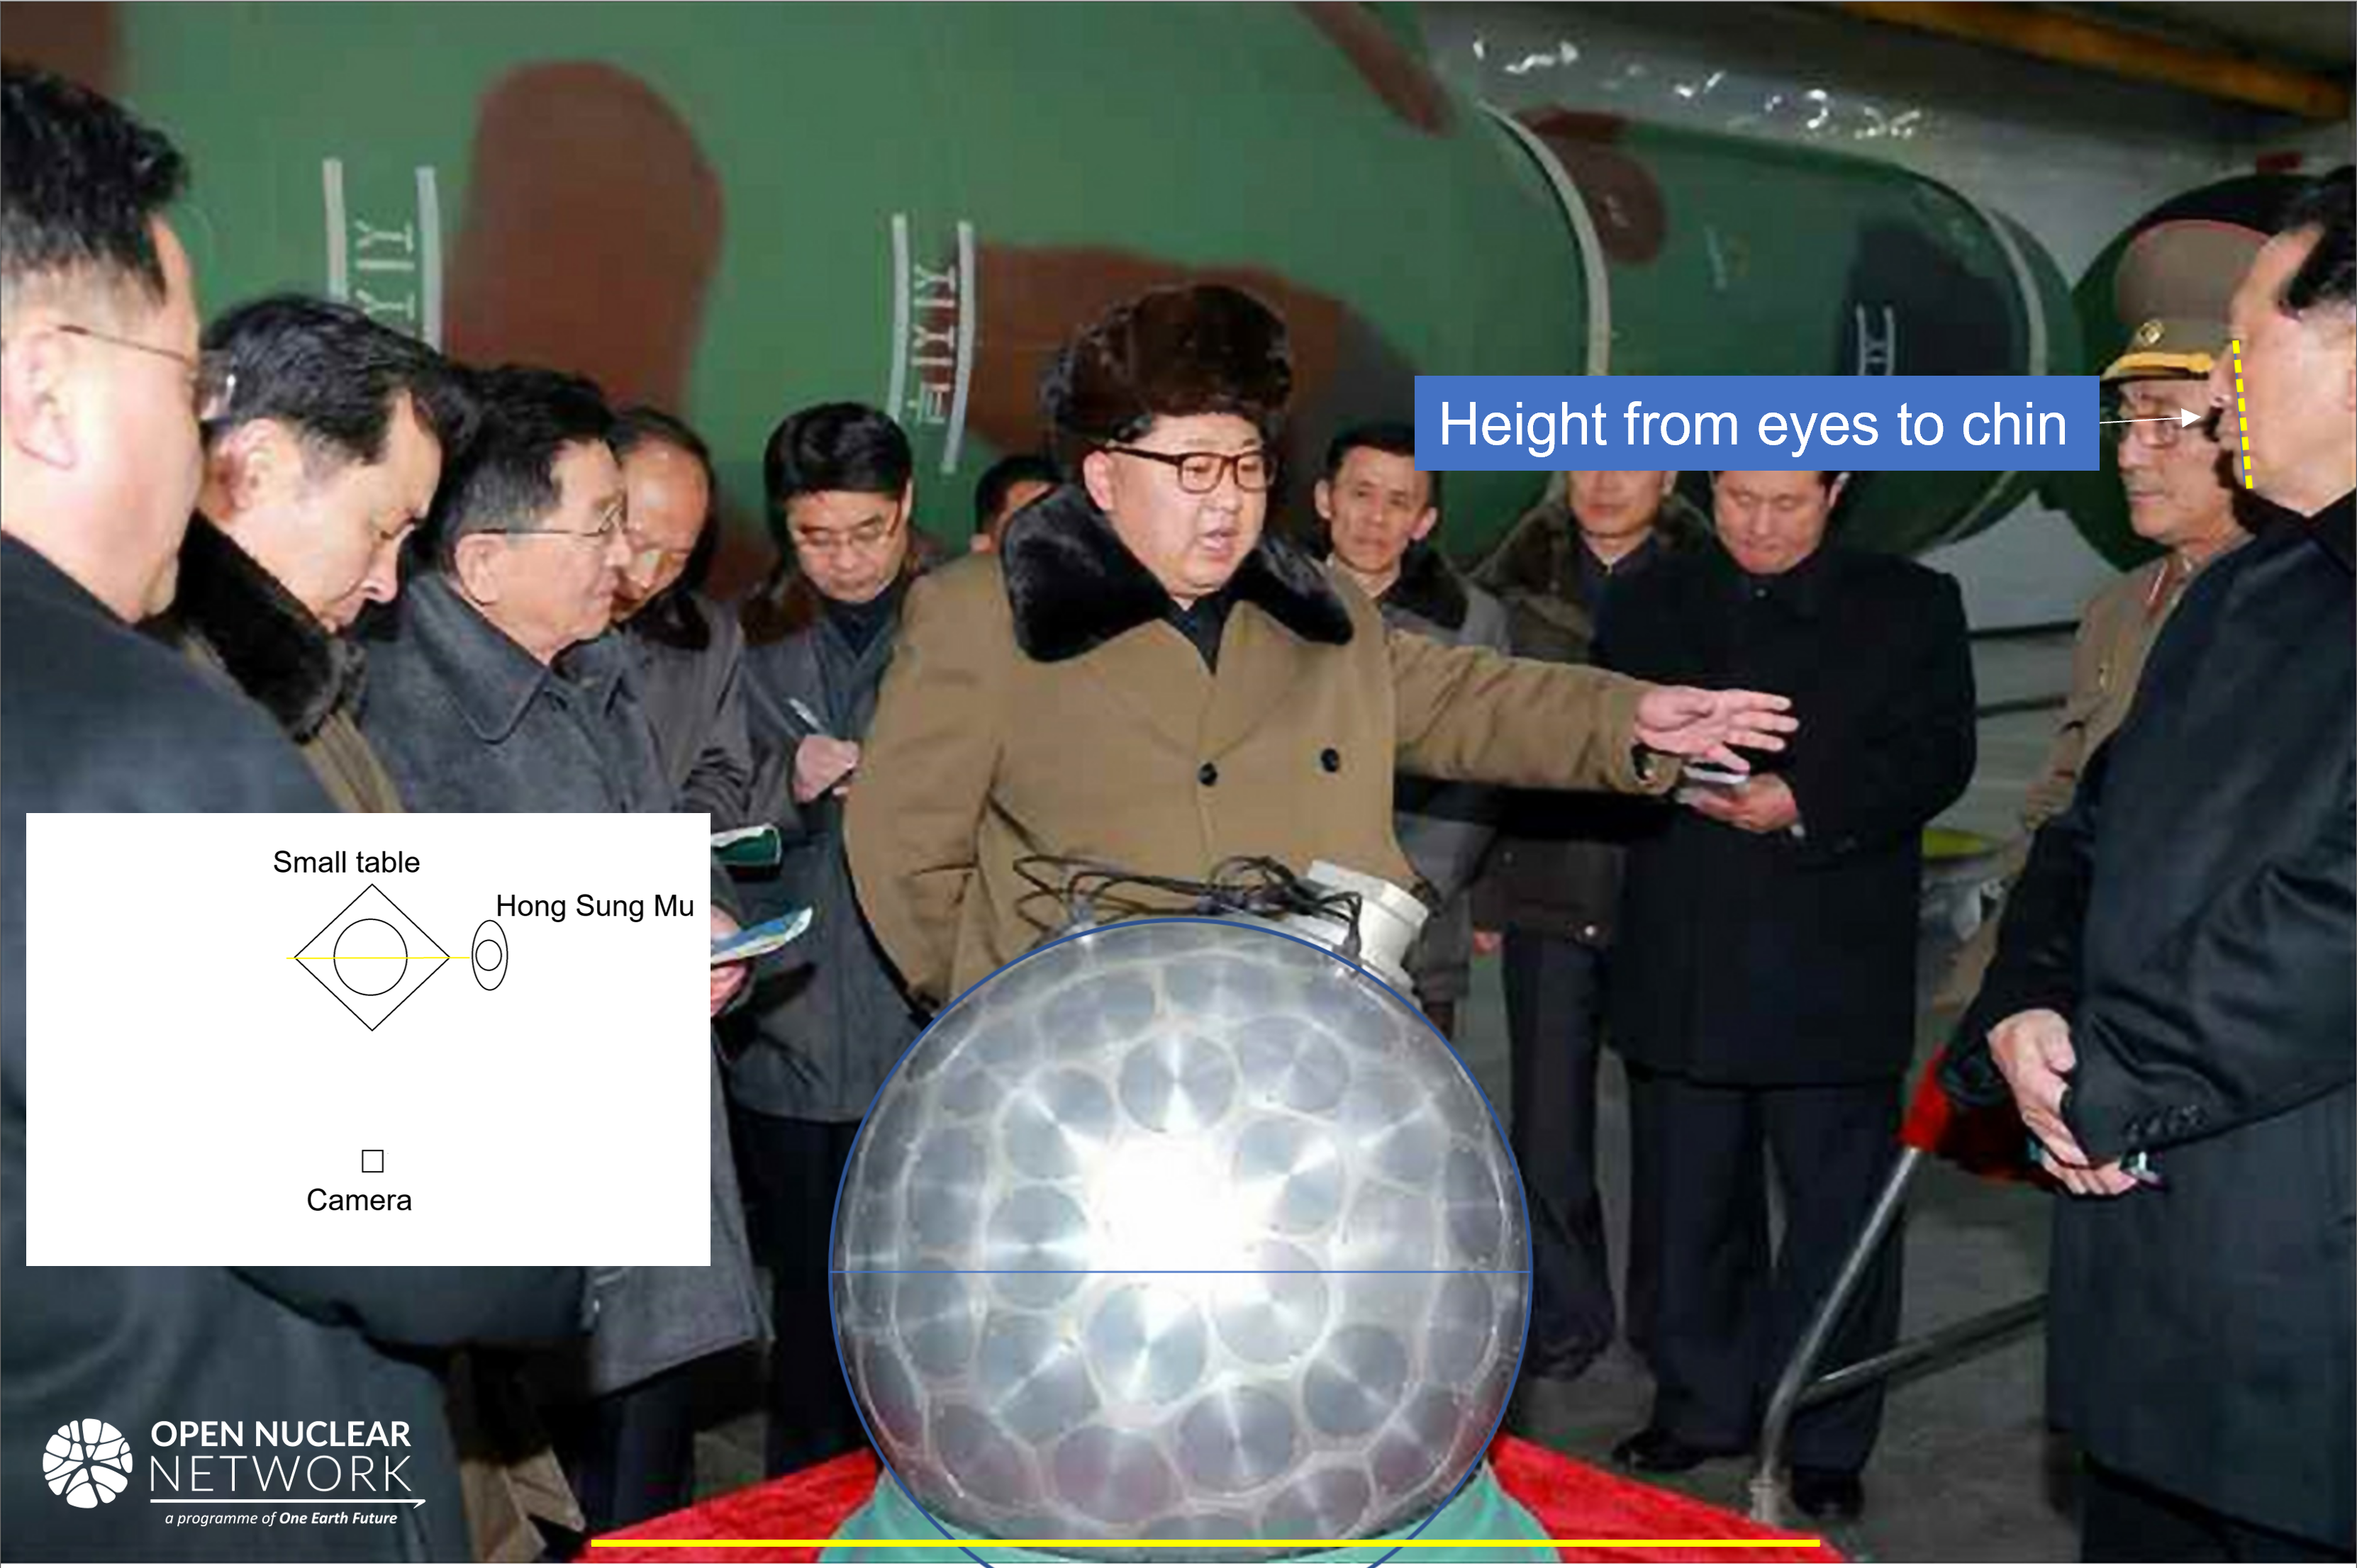 Figure 6. Hong at a relatively favourable position for measuring diameter of purported implosion device. Inset depicts approximate spatial relationship of photo setting. Image: KCNA/Chosun.com